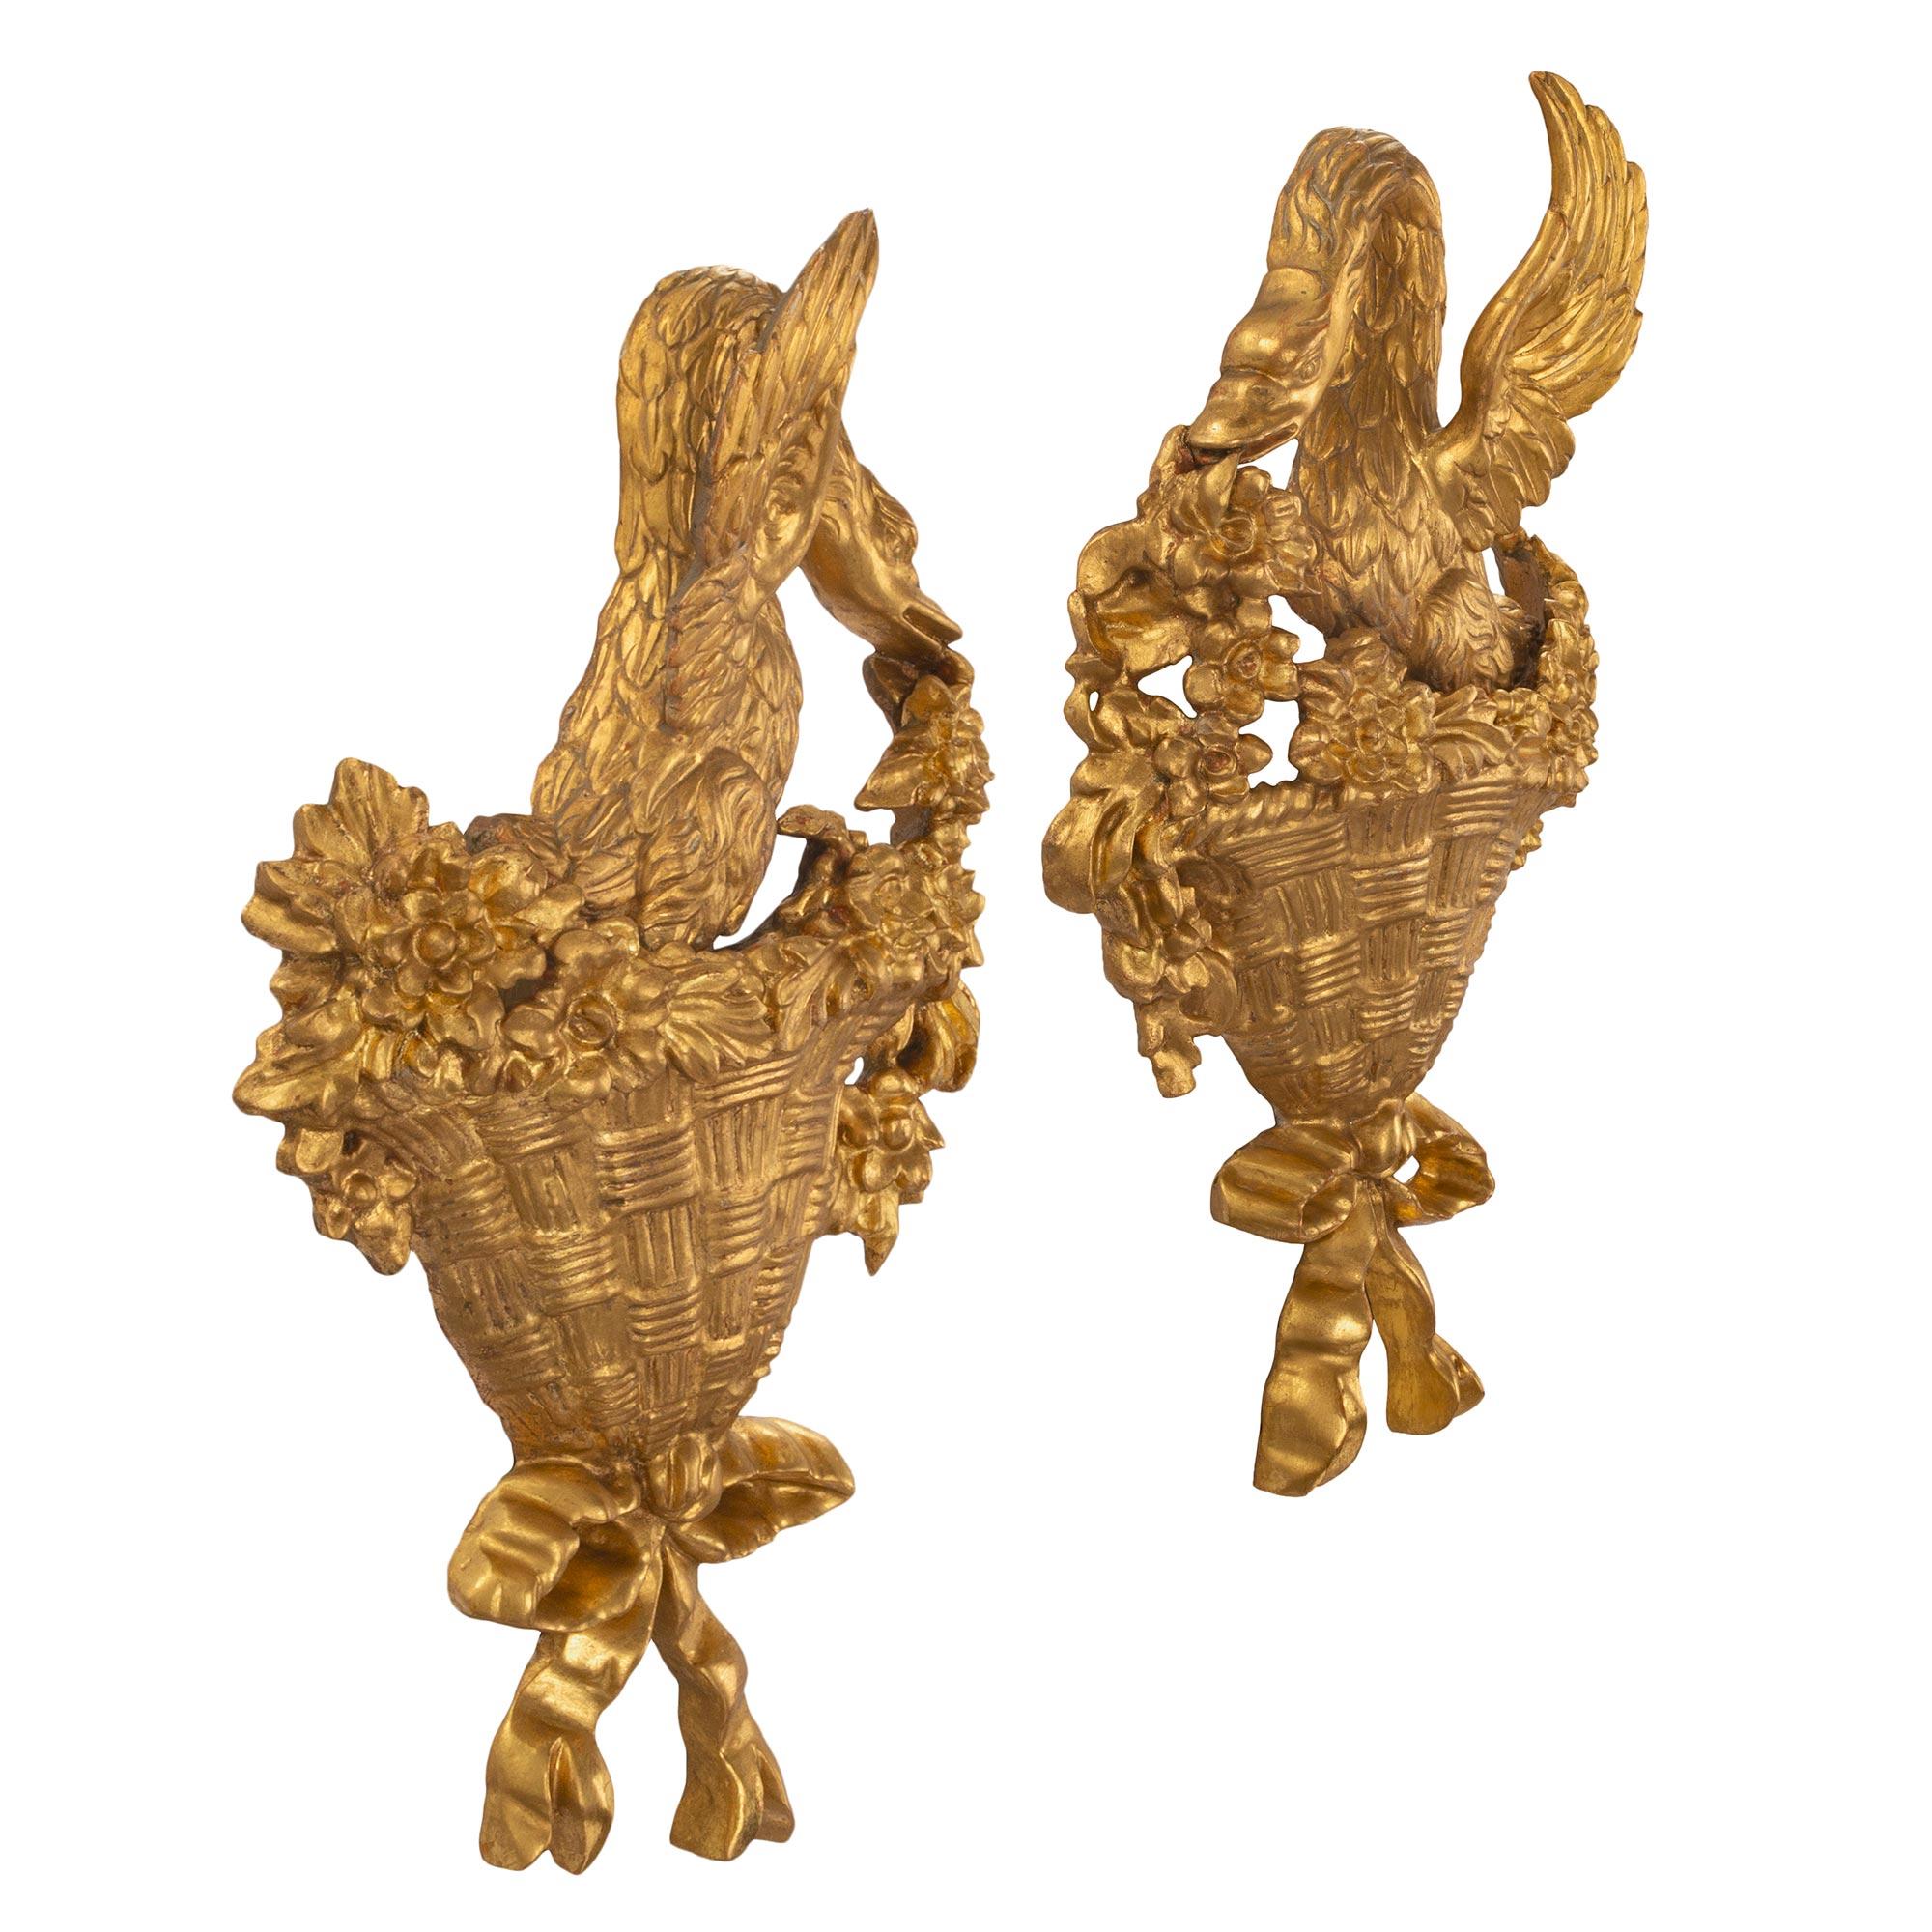 A beautiful and most decorative true pair of Italian Louis XVI st. carved giltwood wall decor. Each decorative element is centered by a charming bottom tied bow below a wonderfully executed woven basket. Two richly carved swans are seated among fine